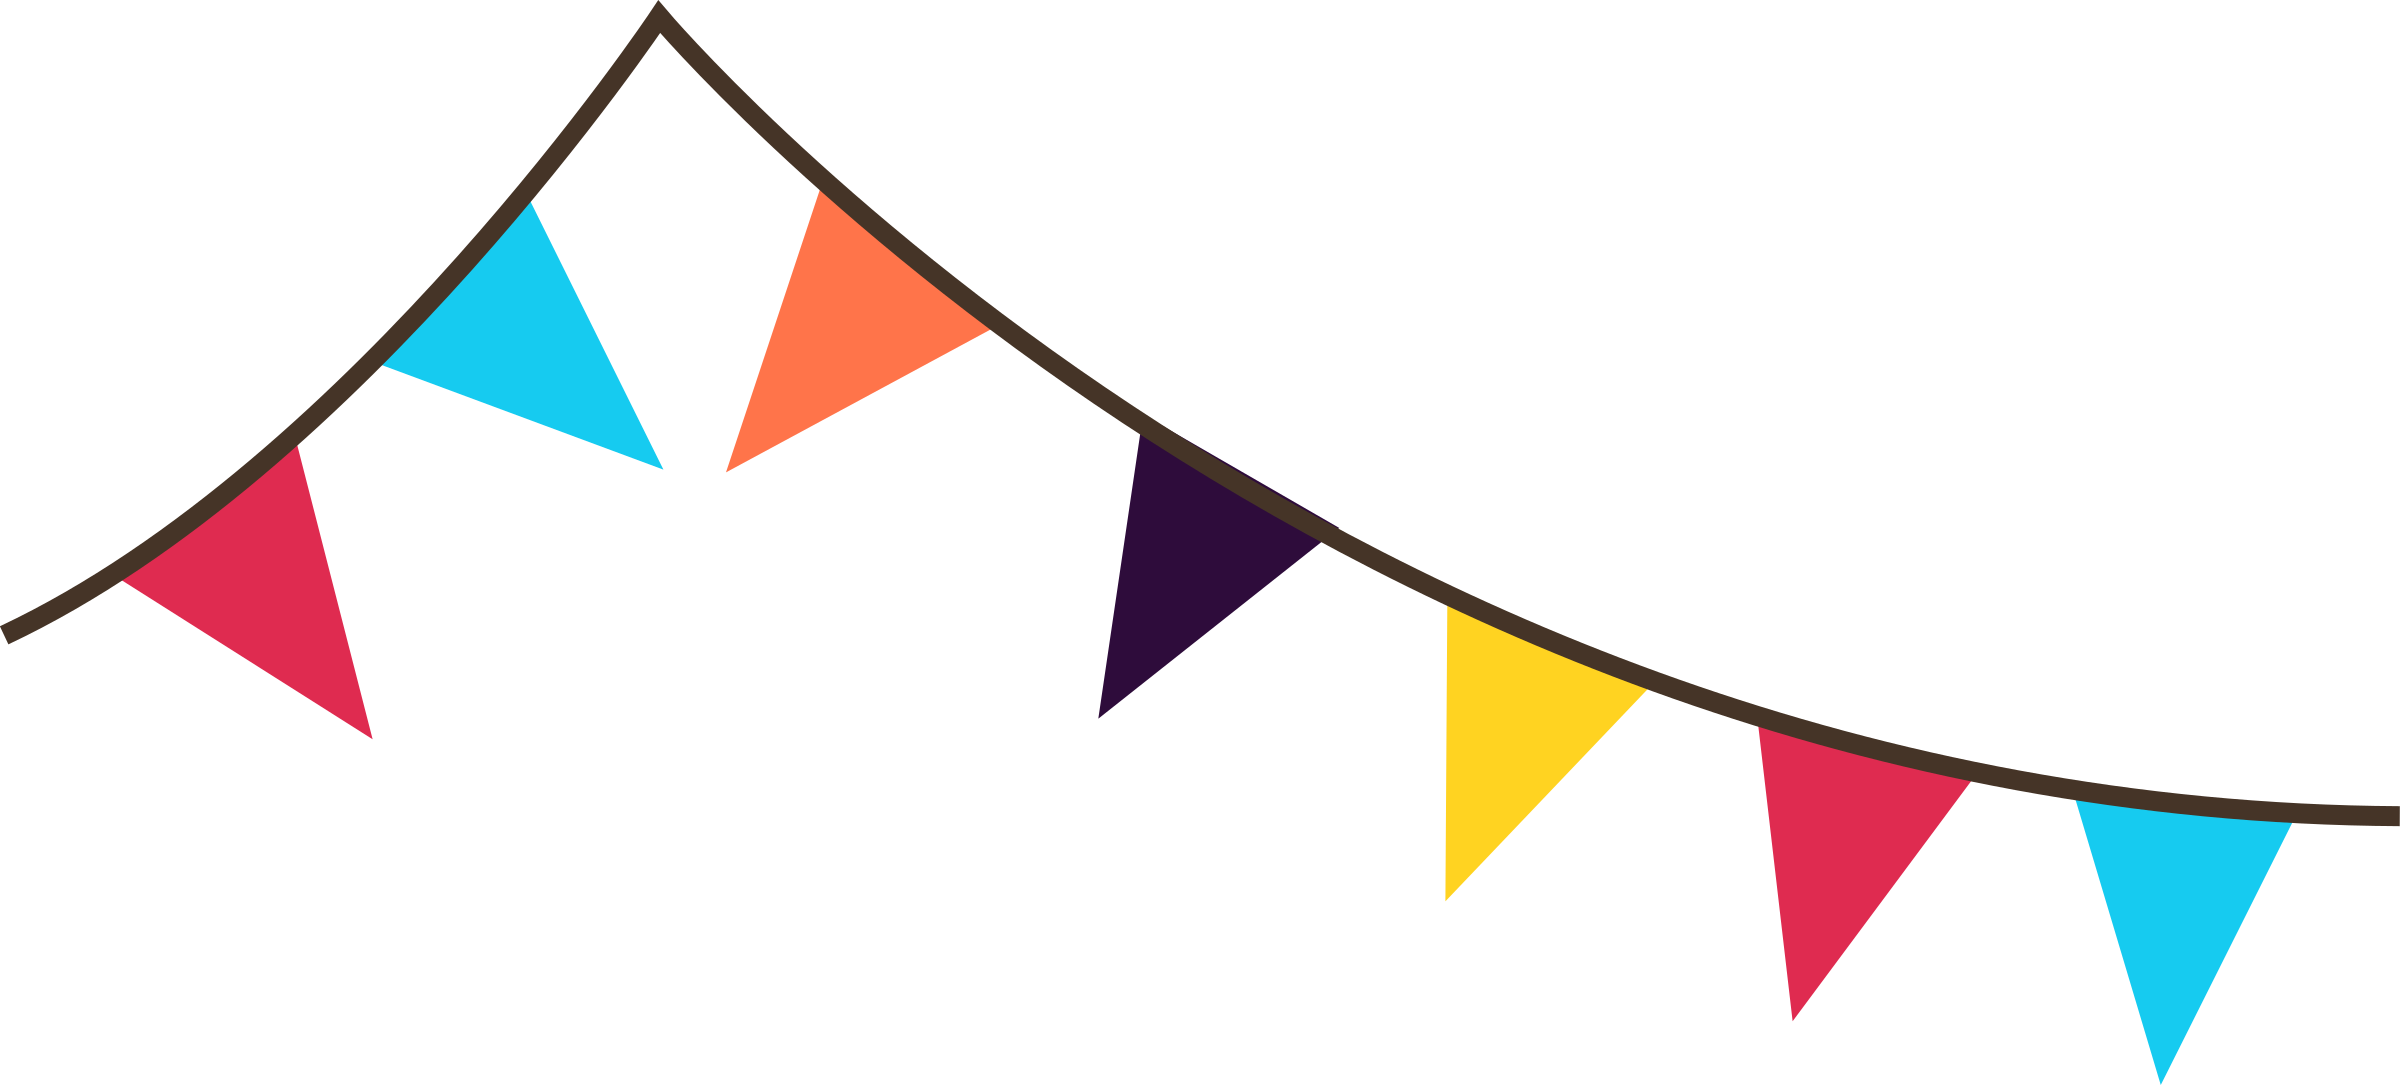 Bunting Banner Flags By Spacefem